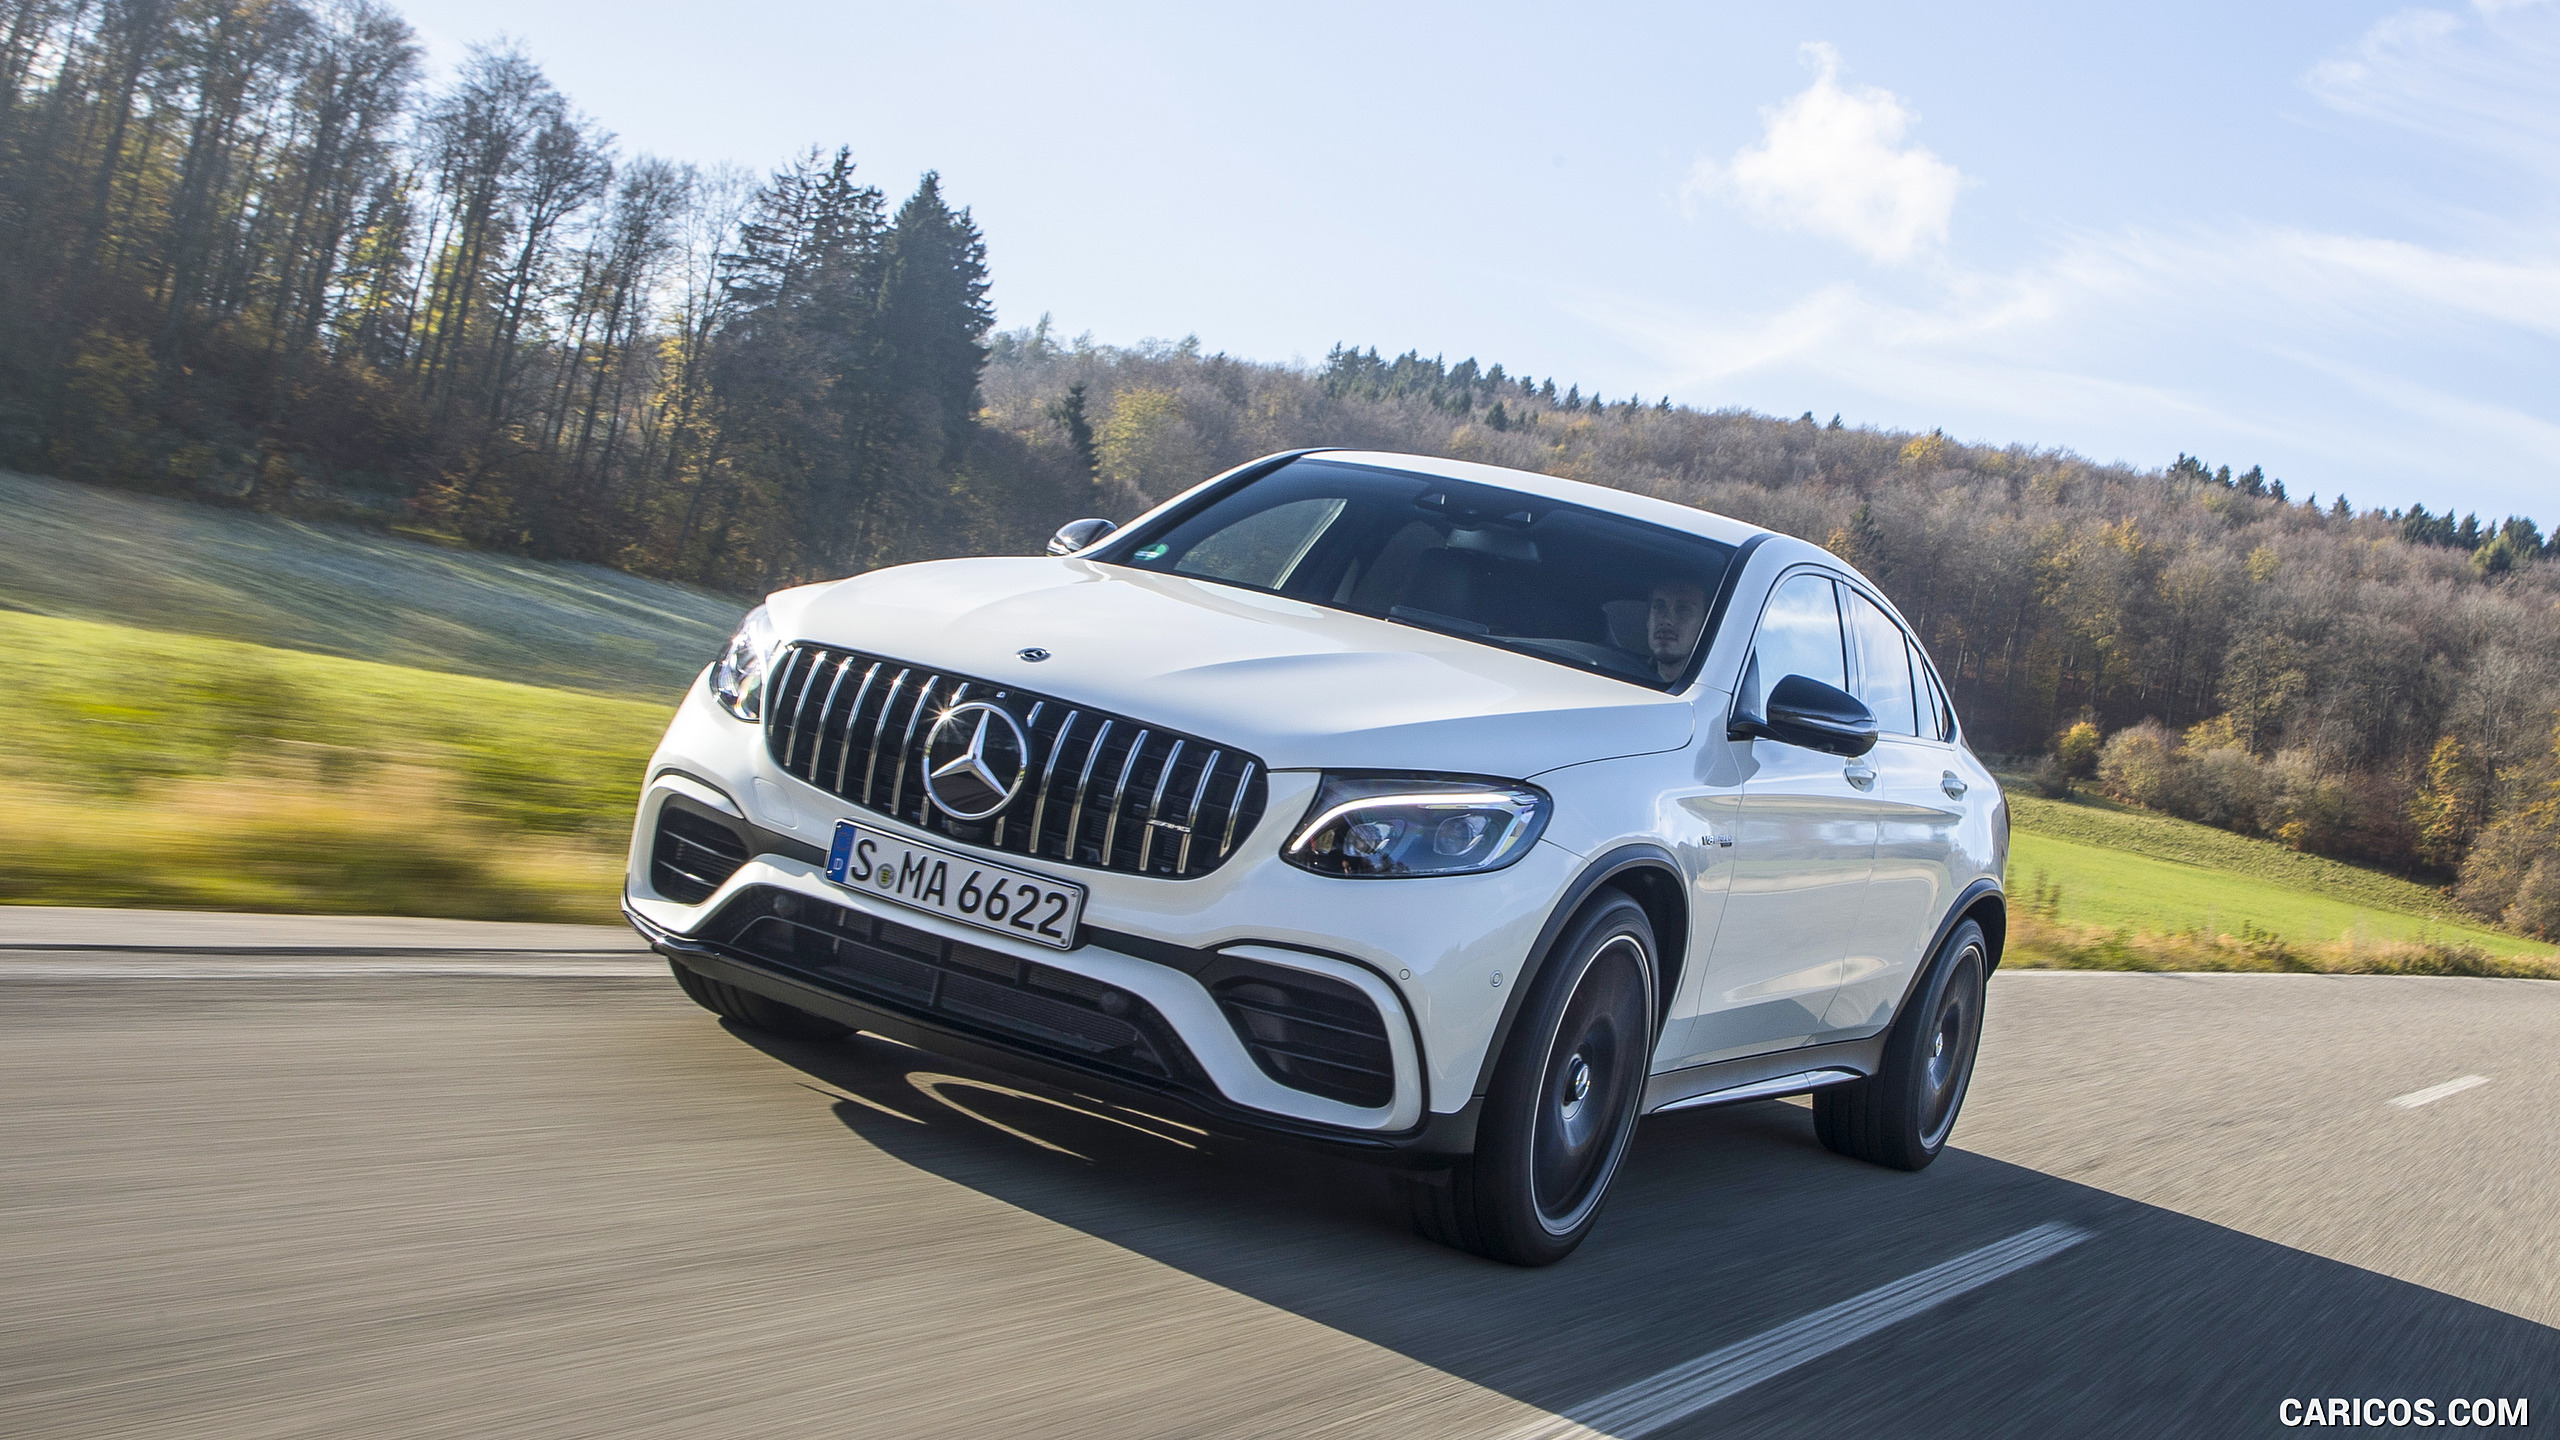 2018 Mercedes-AMG GLC 63 S Coupe - Front Three-Quarter, #43 of 75